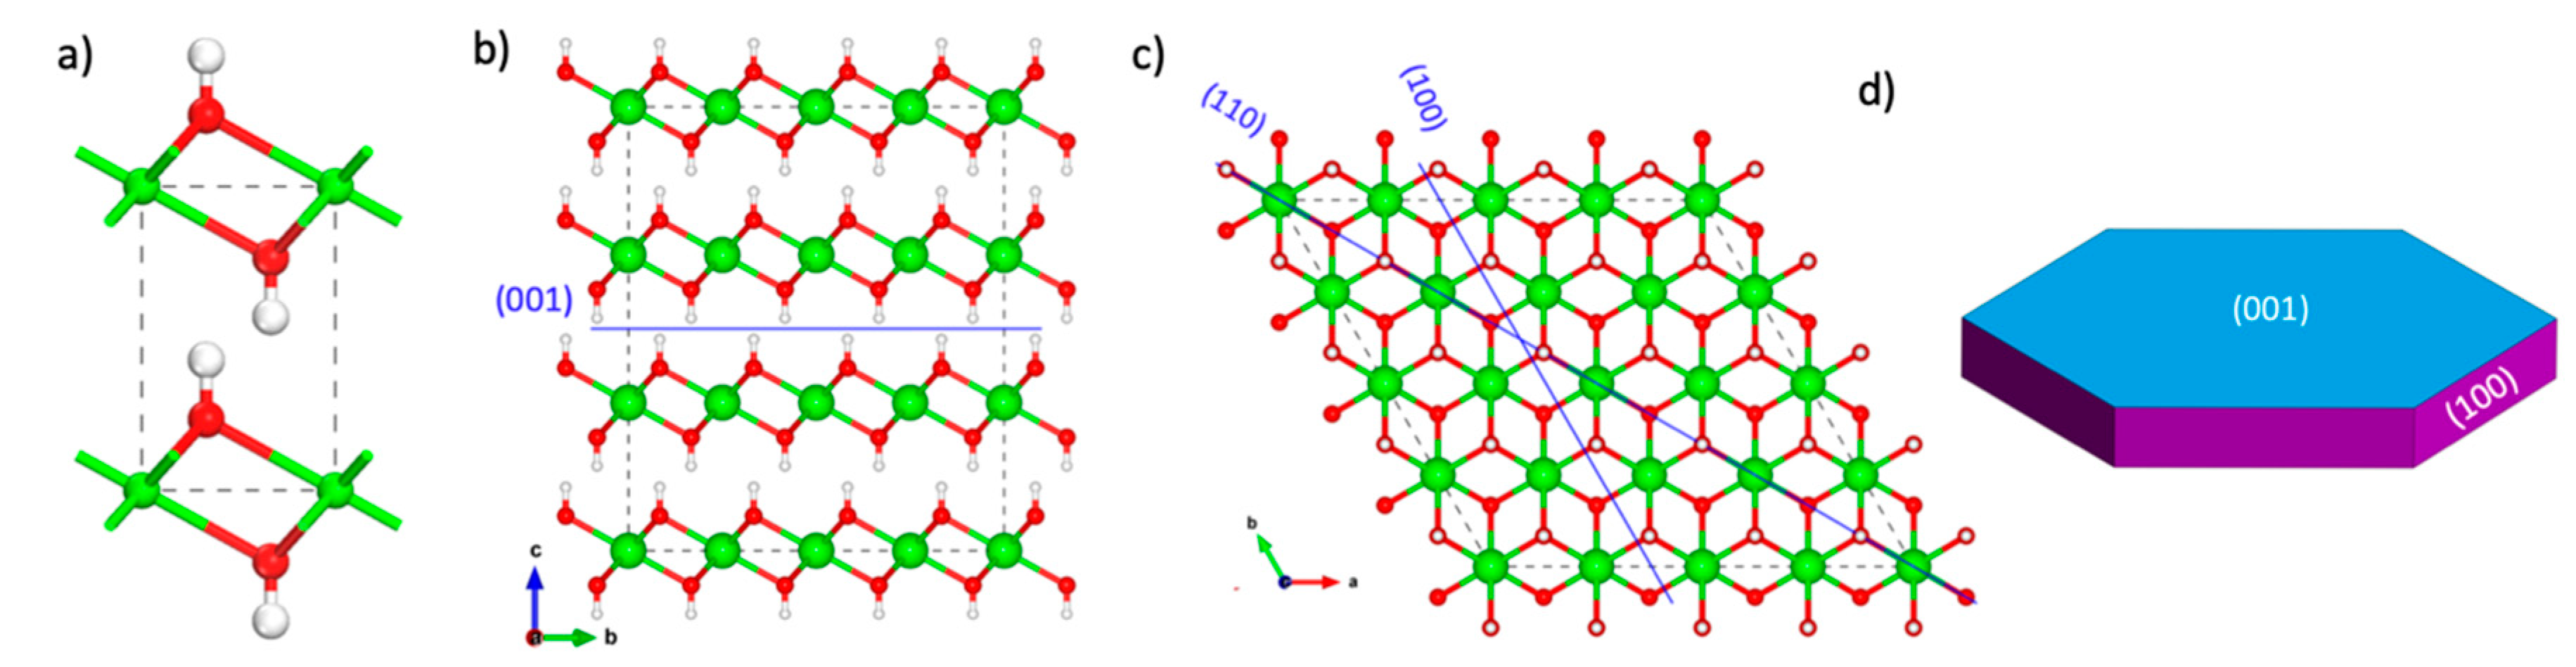 skip generation Remains Minerals | Free Full-Text | Carbonation Reaction Mechanisms of Portlandite  Predicted from Enhanced Ab Initio Molecular Dynamics Simulations | HTML